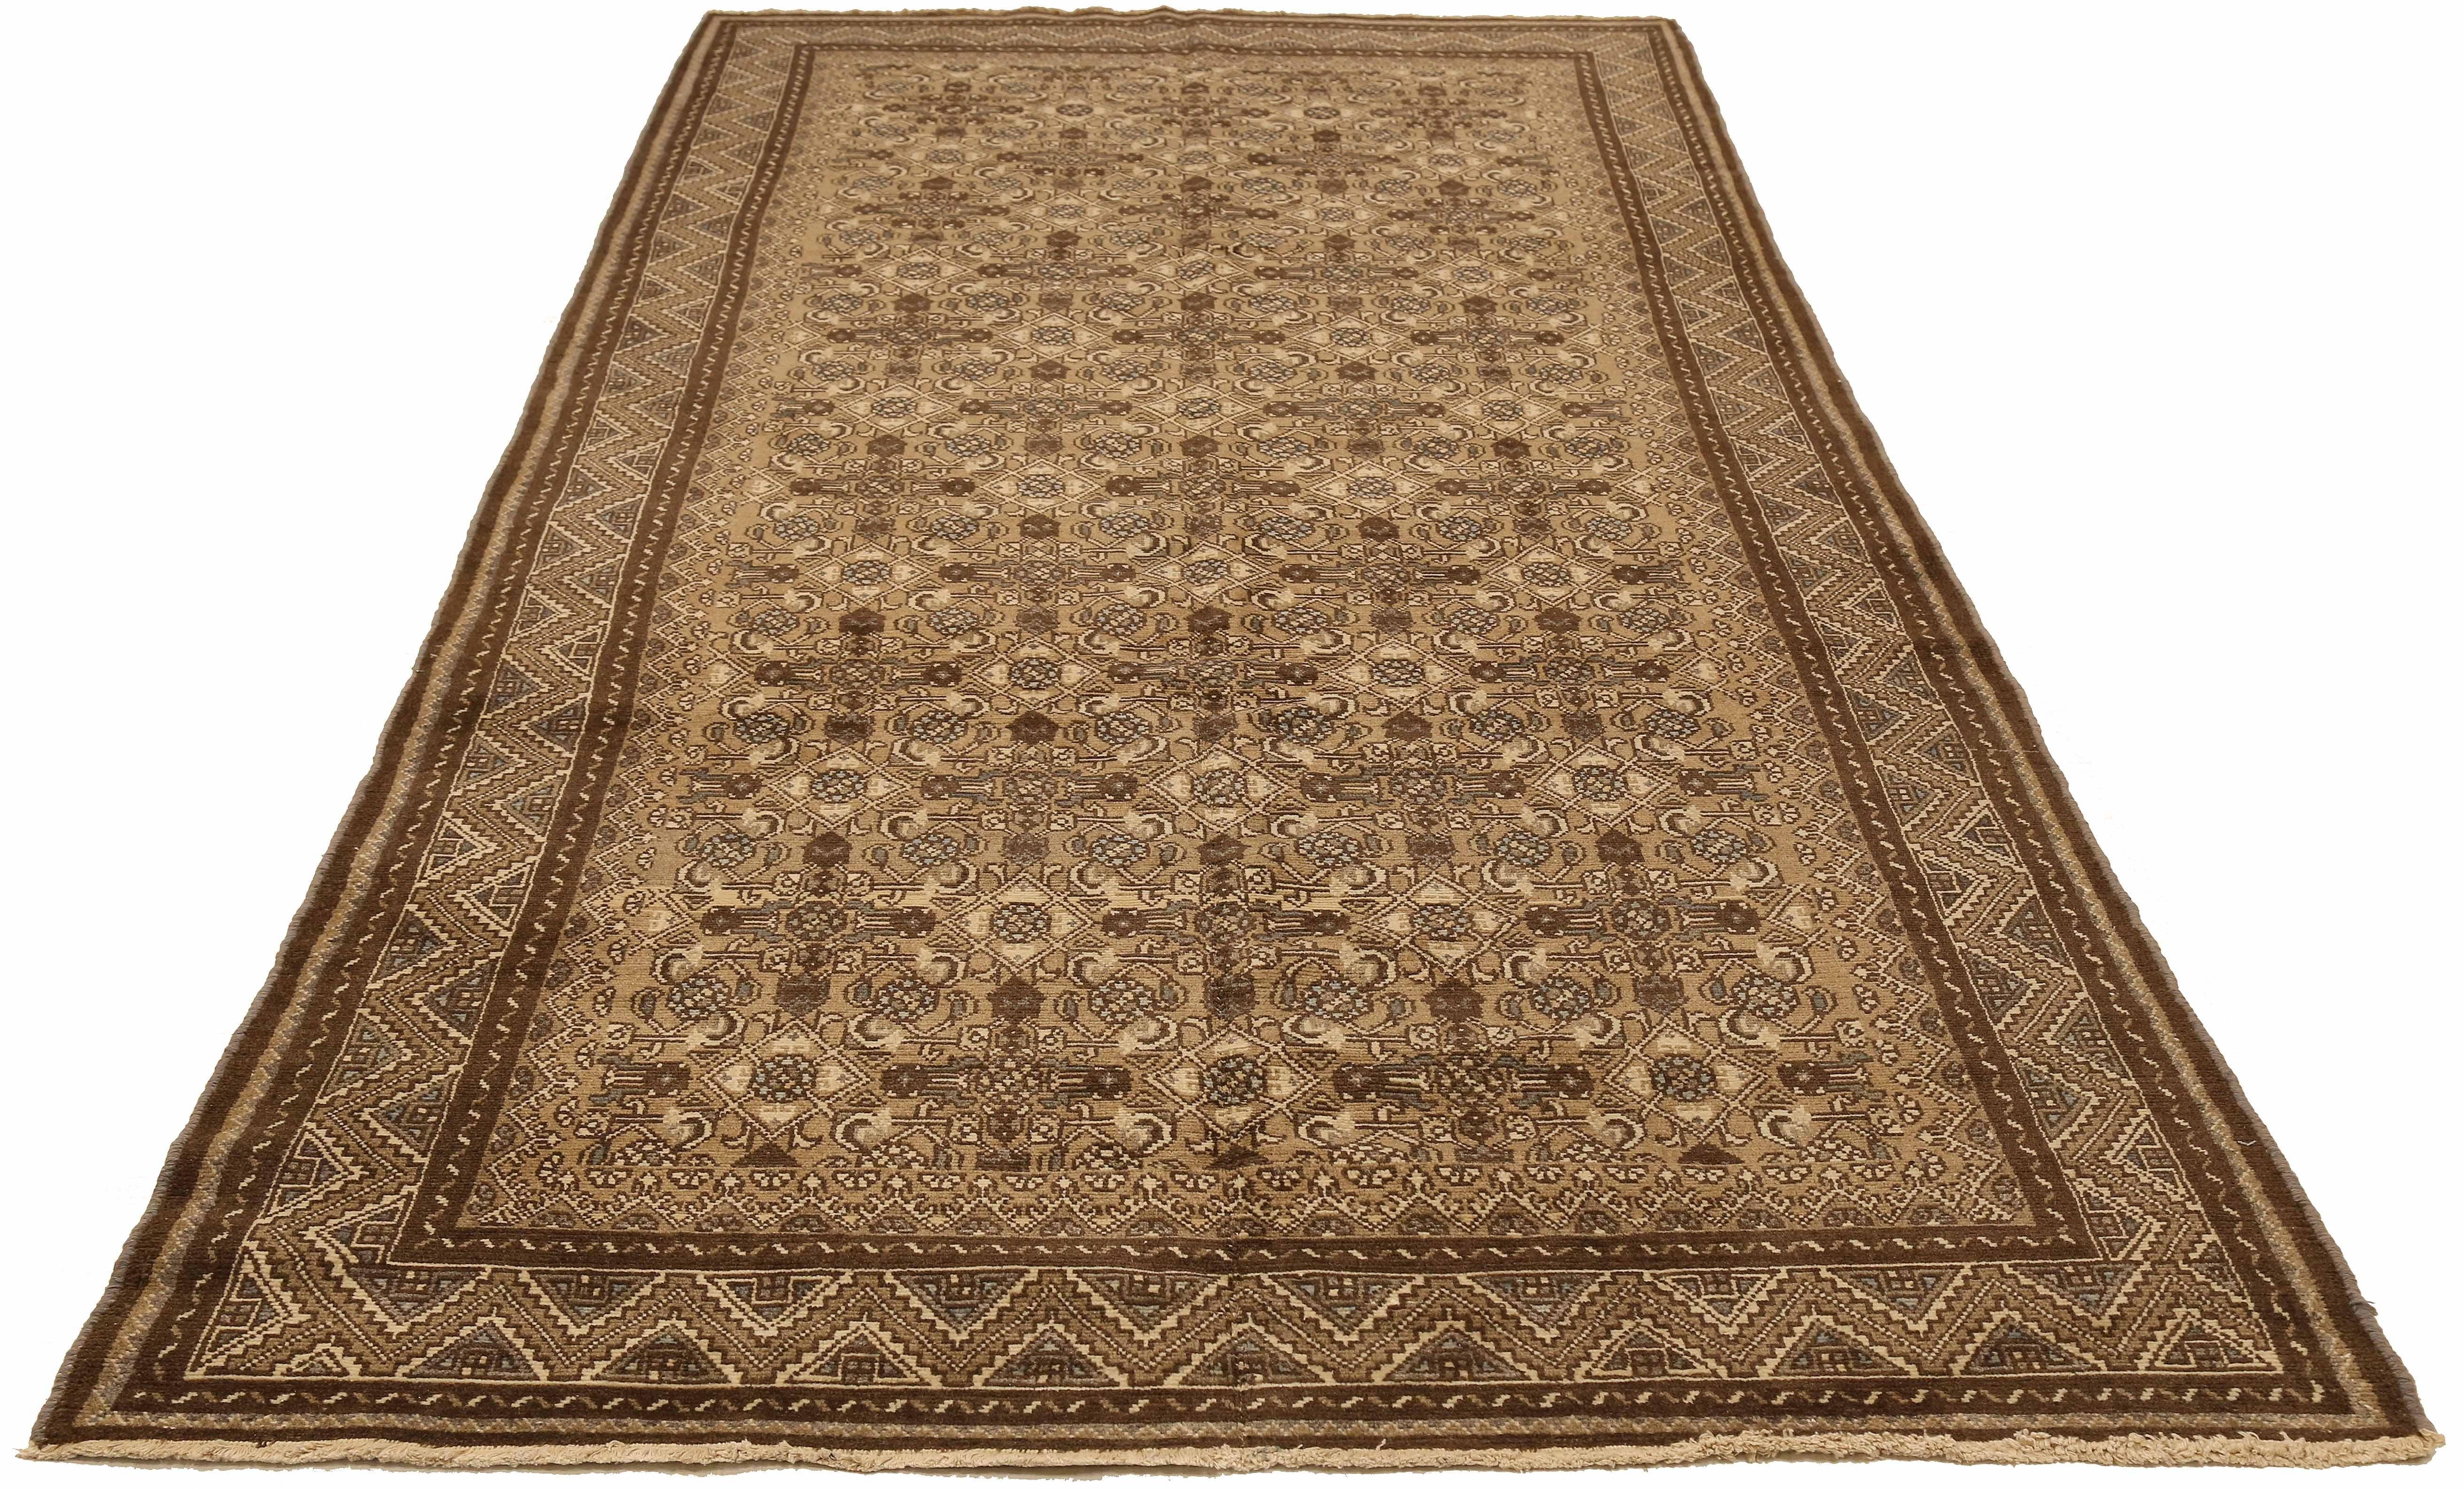 Antique Persian runner rug handwoven from the finest sheep’s wool and colored with all-natural vegetable dyes that are safe for humans and pets. It’s a traditional Malayer design featuring ivory and brown geometric details over a beige field. It’s a